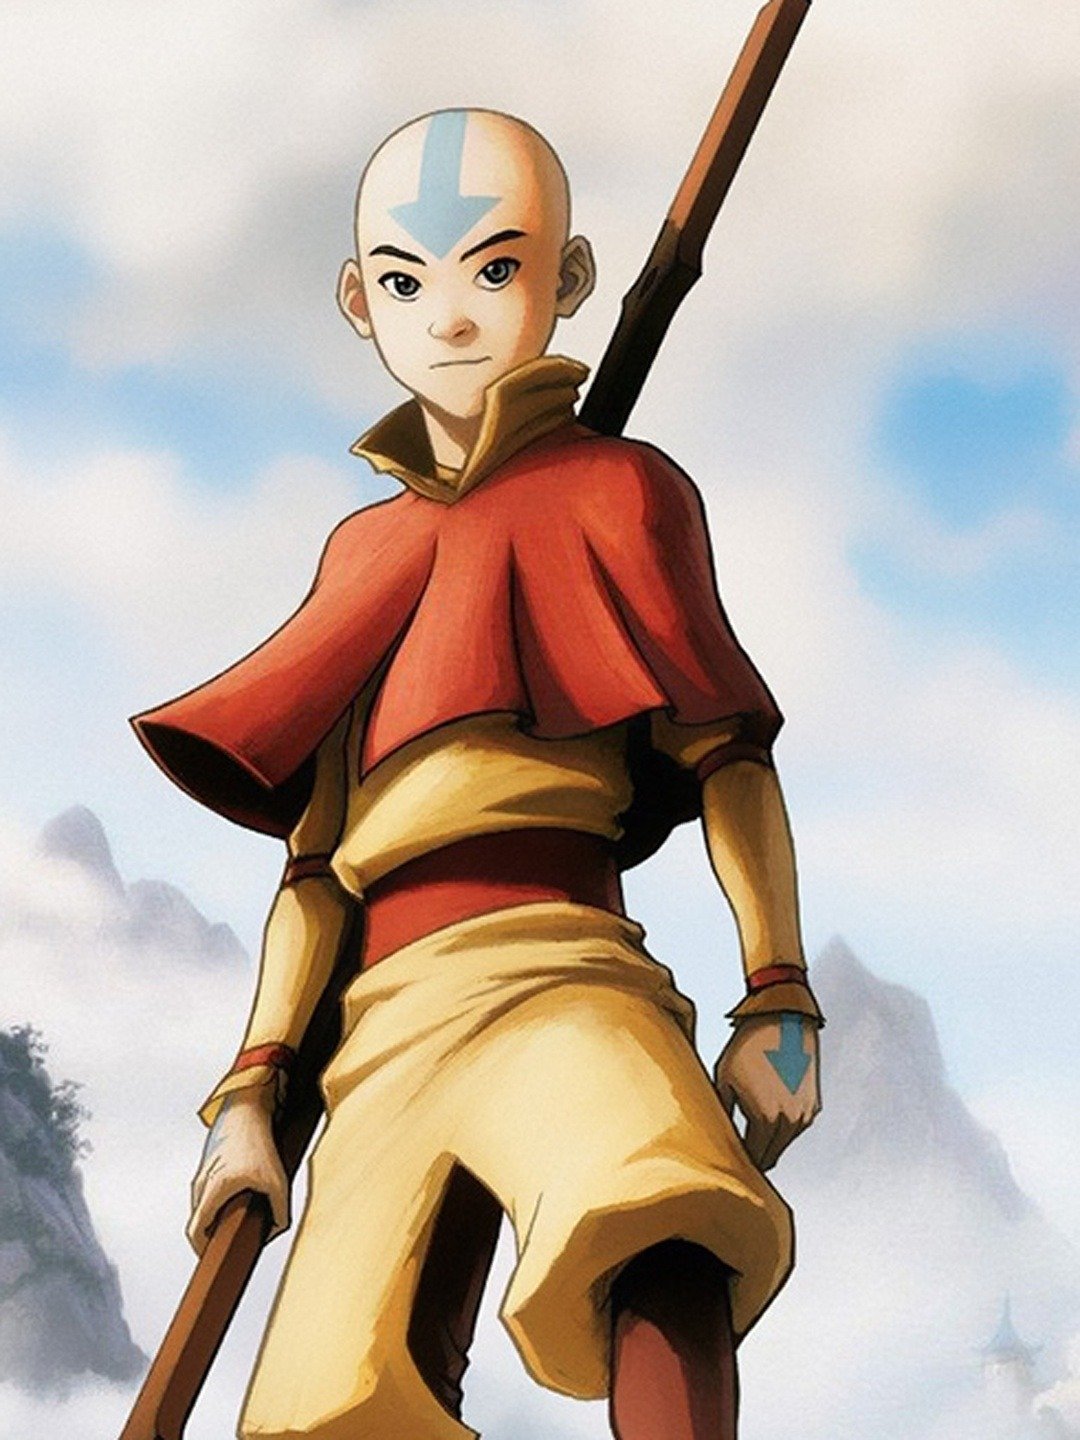 Avatar: The Last Airbender - Rotten Tomatoes